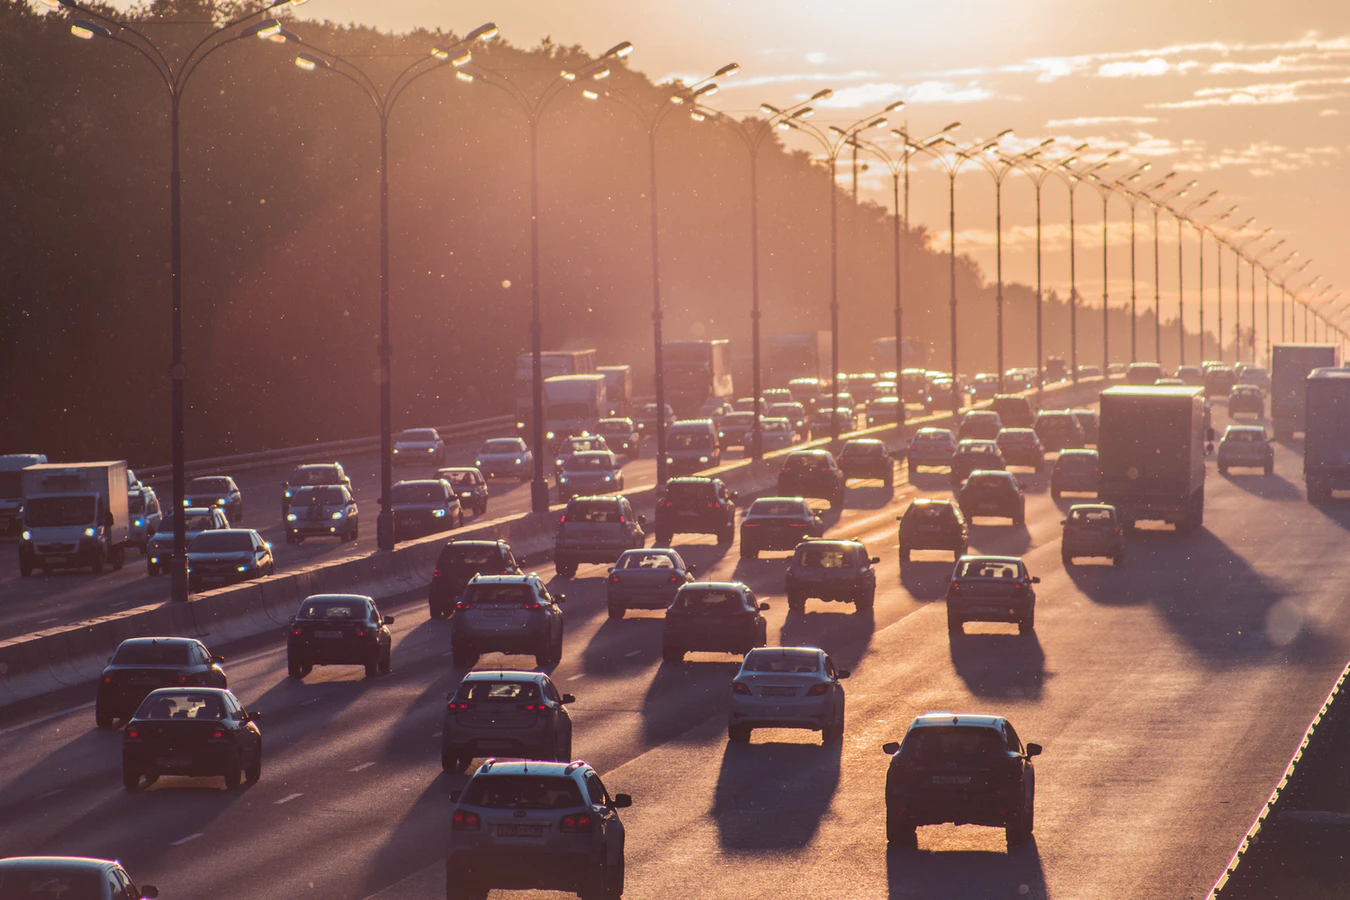 If you are usually driving during rush hour, you need to be extra cautious to keep yourself and others safe. Here are some tips to stay safe in the most chaotic traffic conditions.